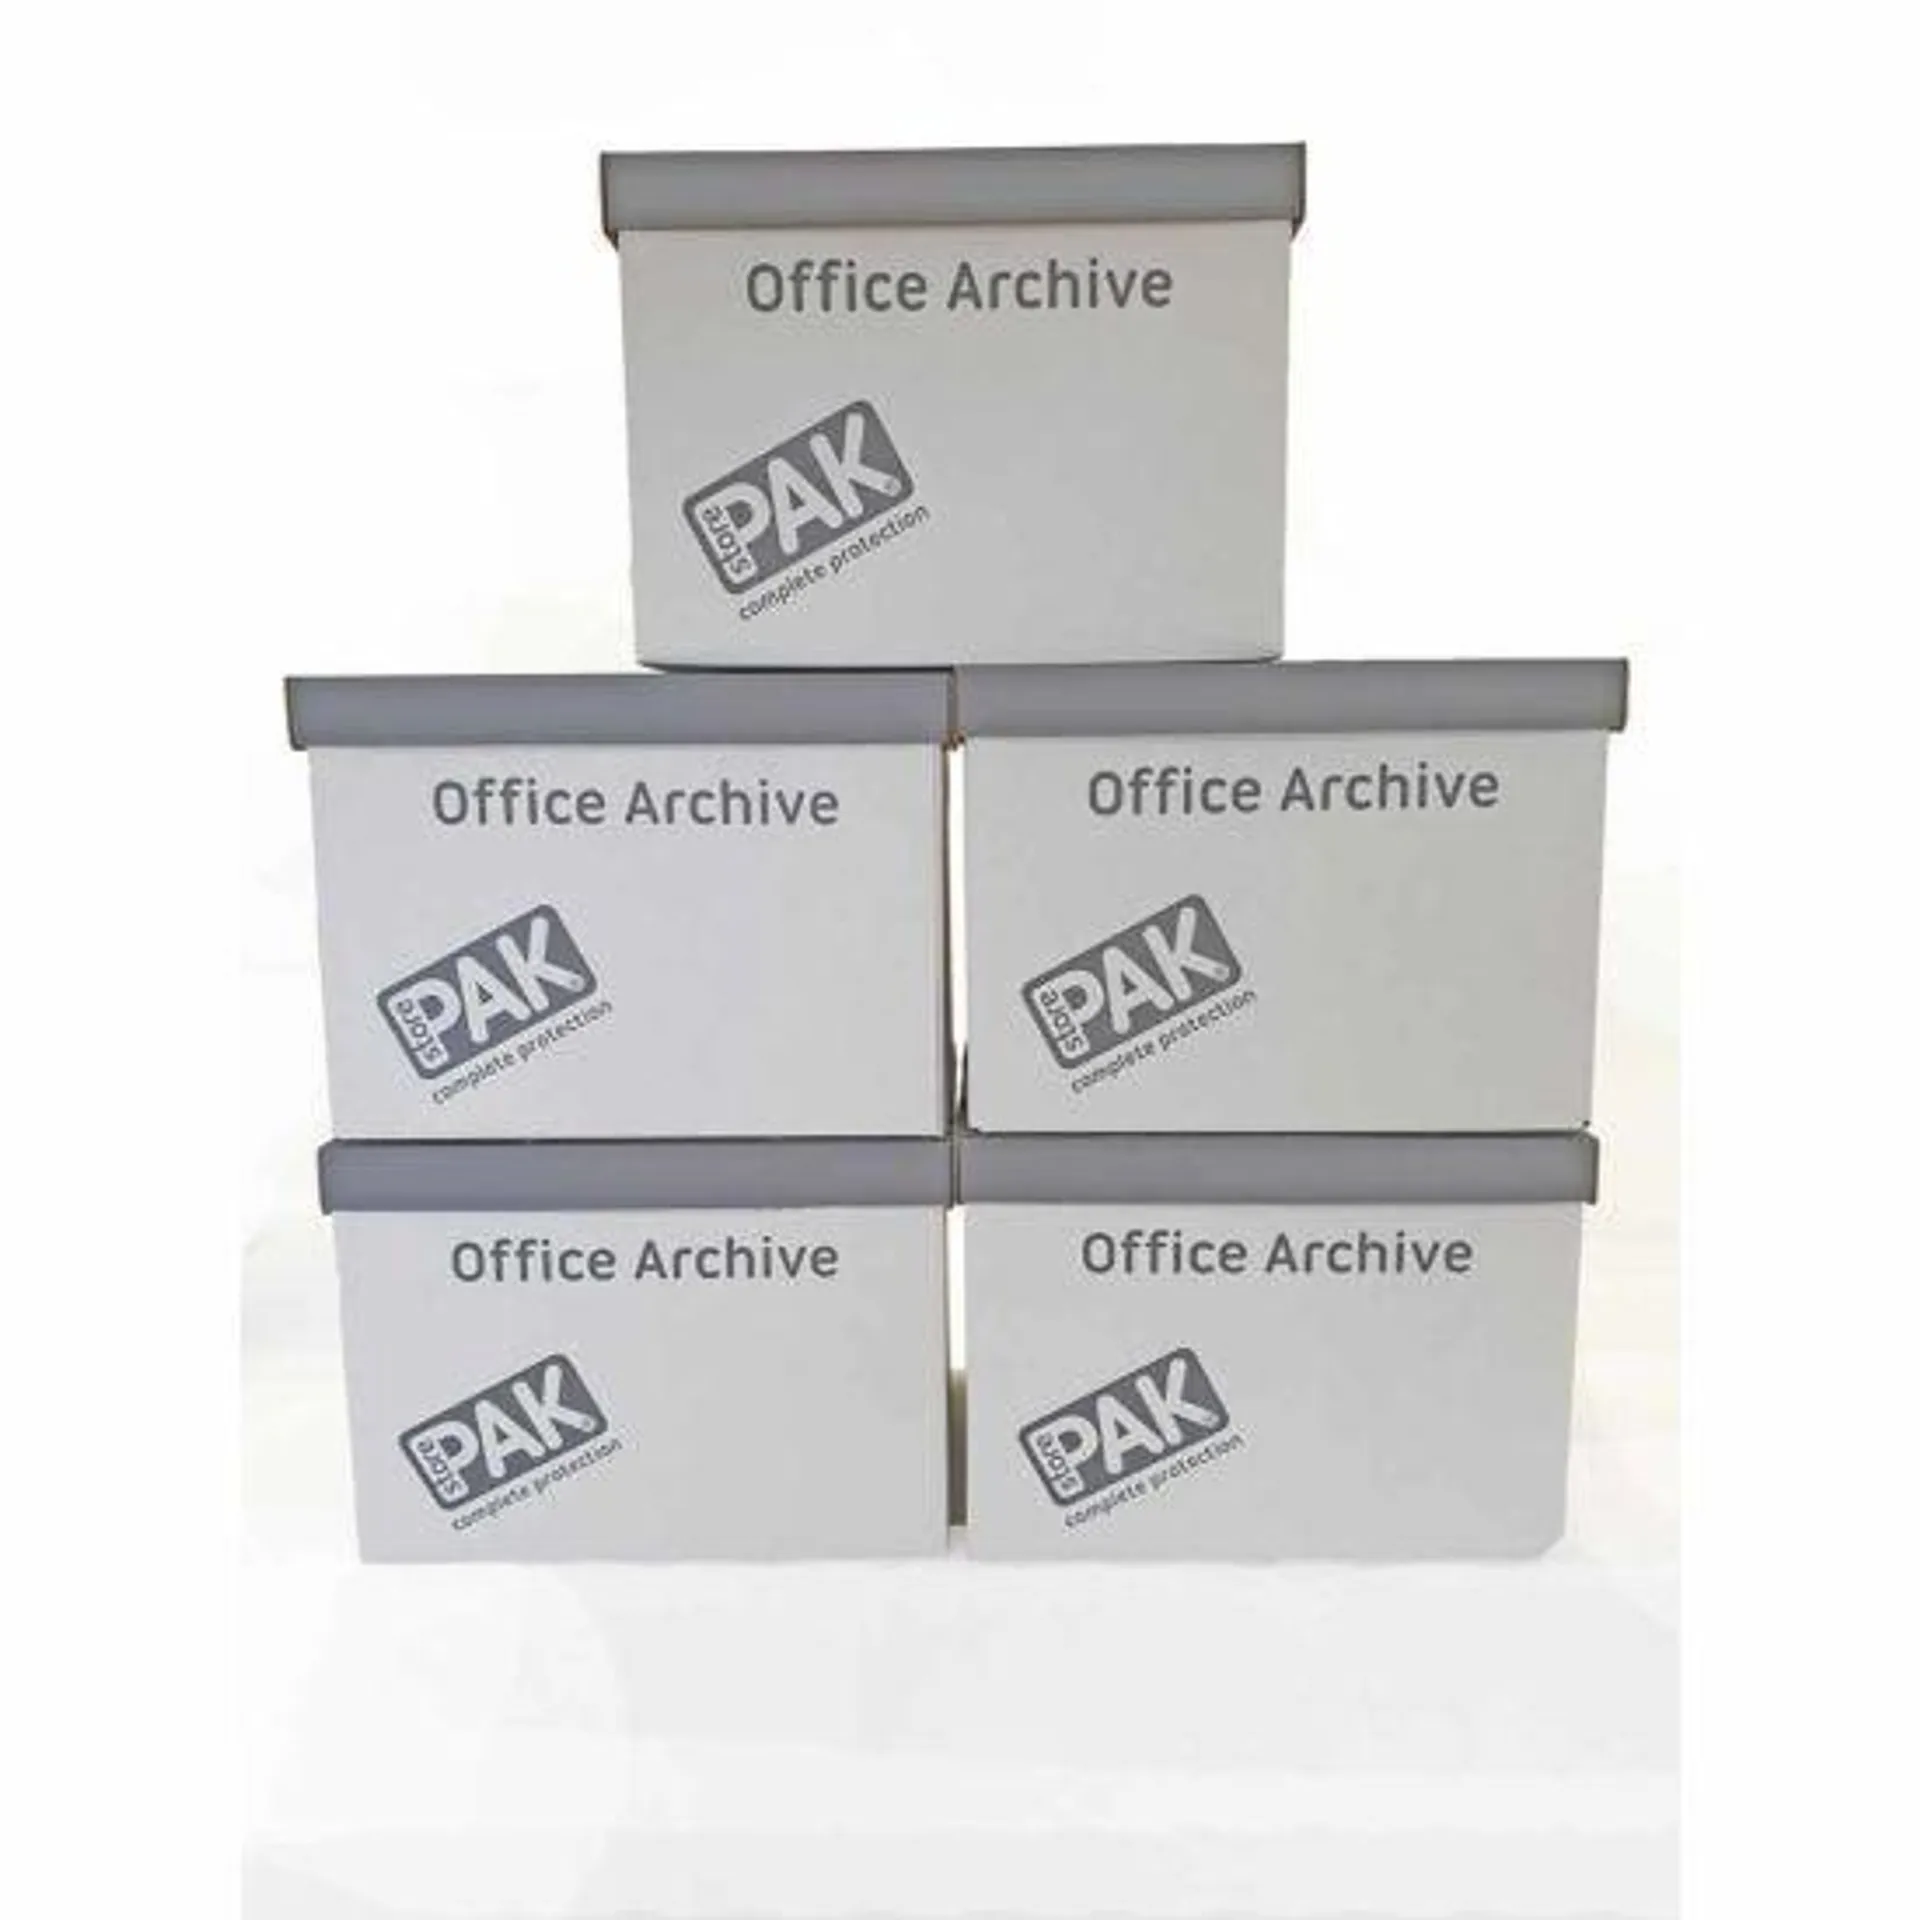 StorePAK Office Archive Box and Lid Pack of 5